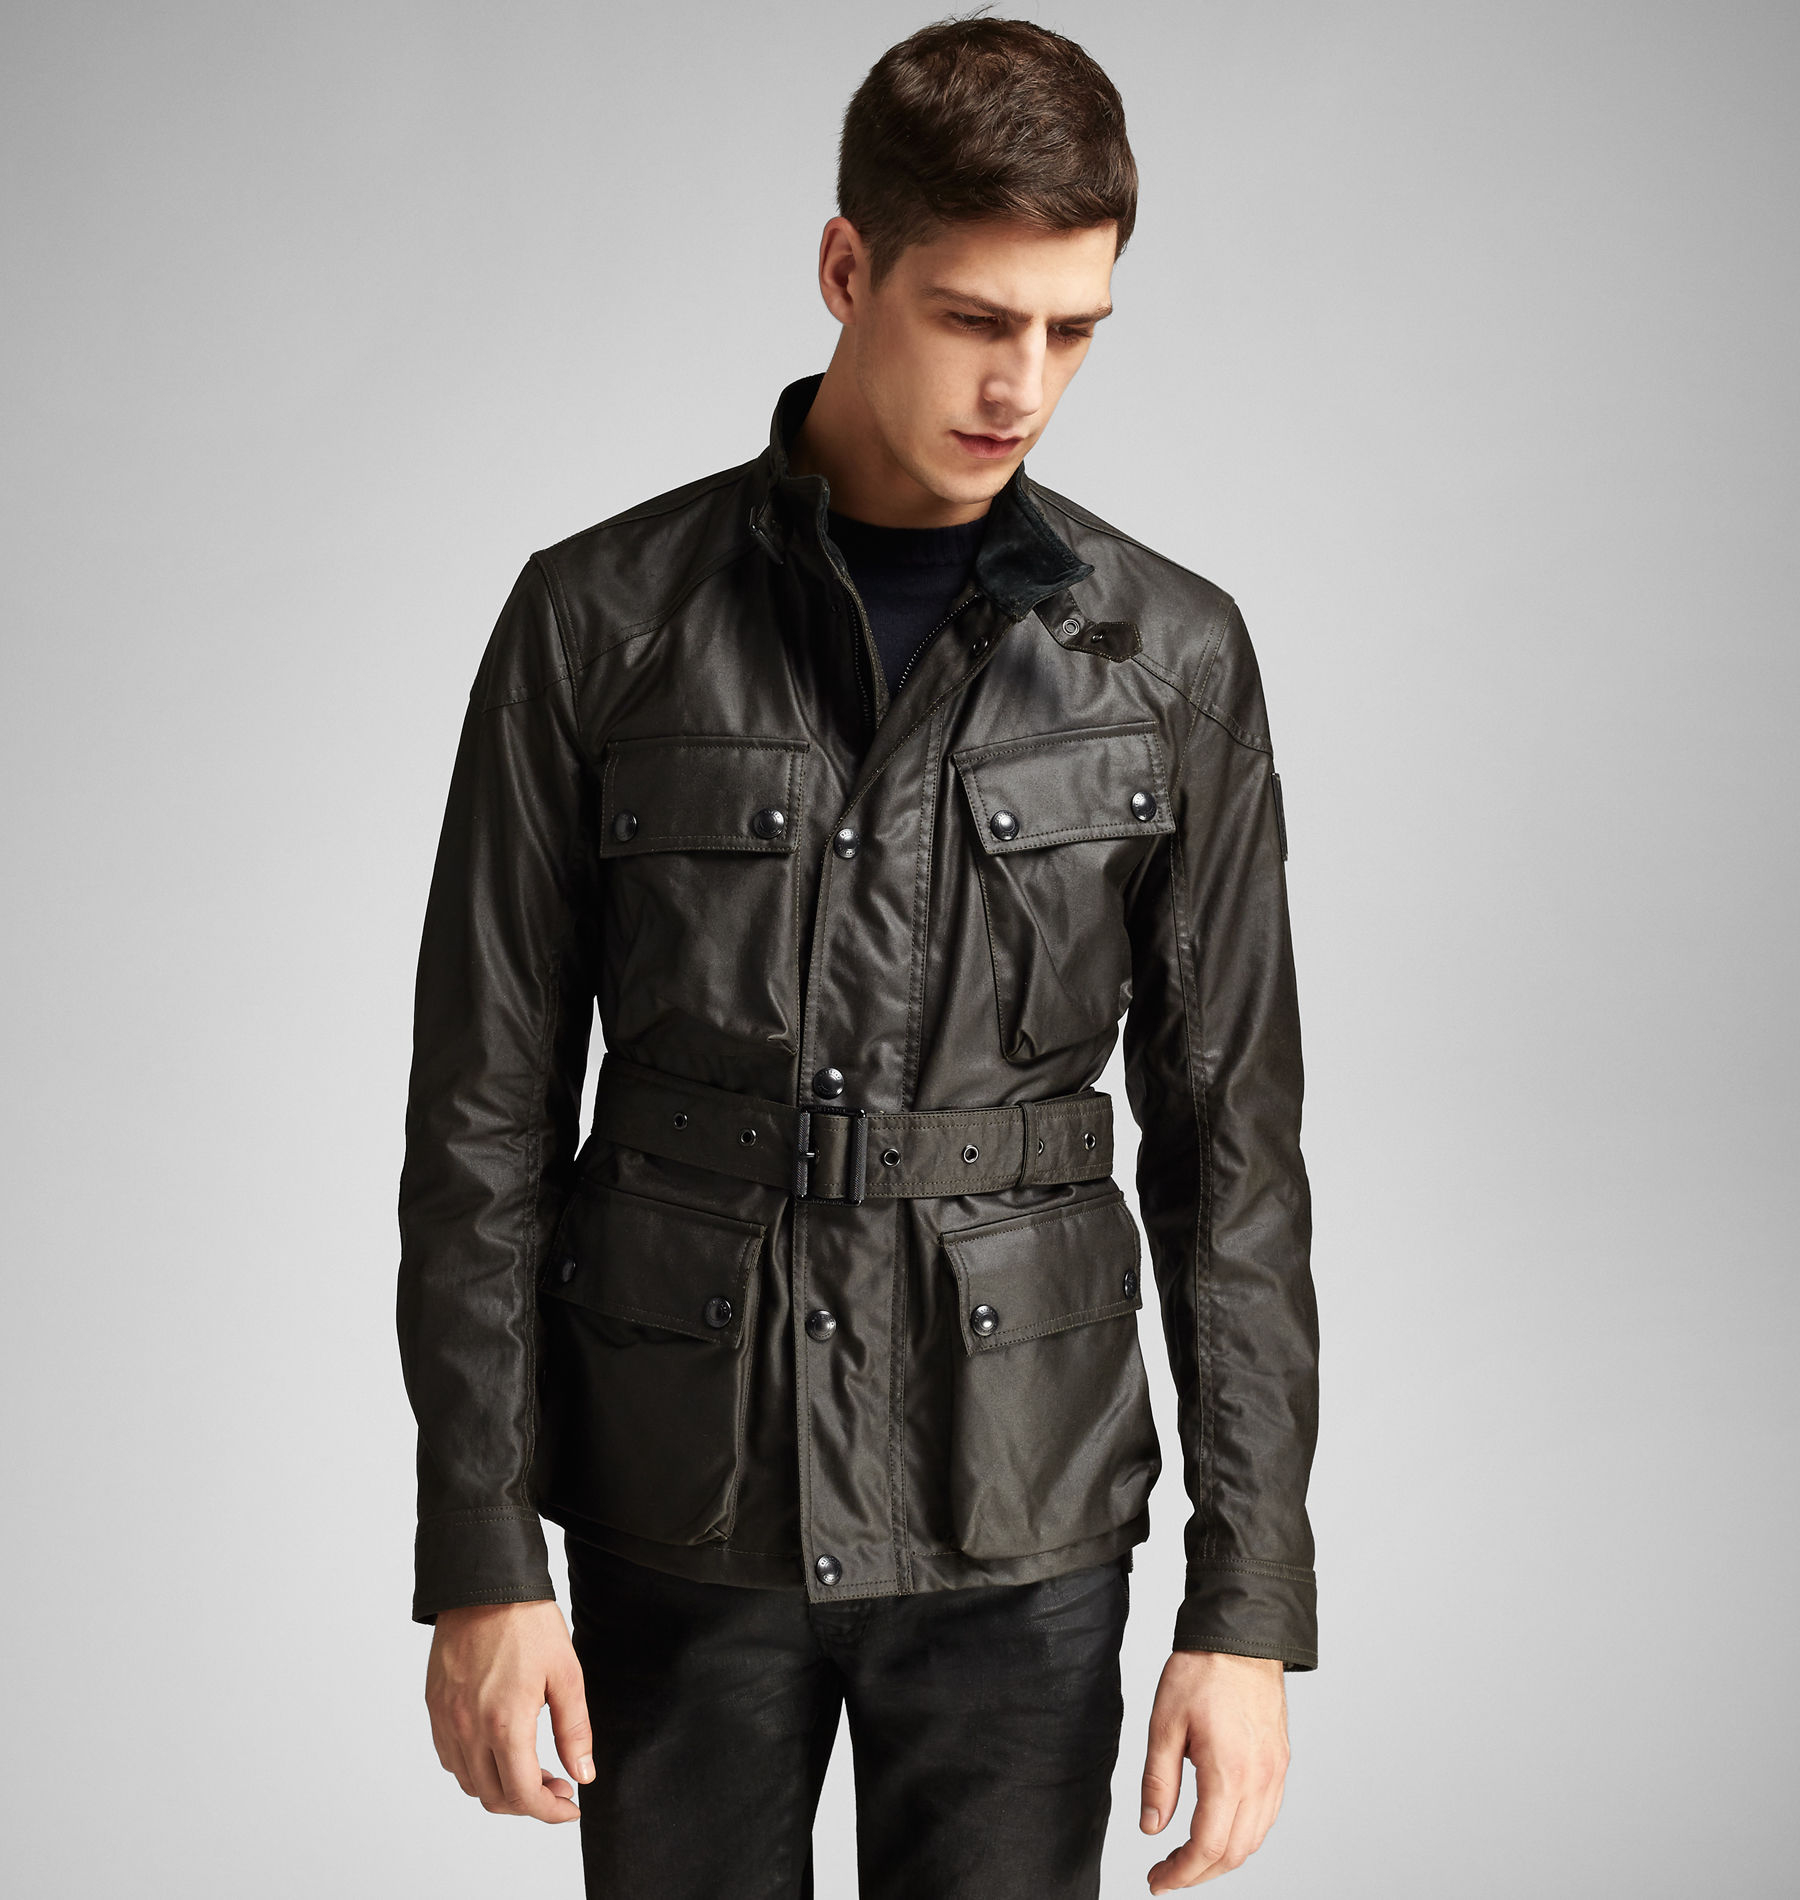 Belstaff Circuitmaster Jacket in Faded Olive (Green) for Men - Lyst